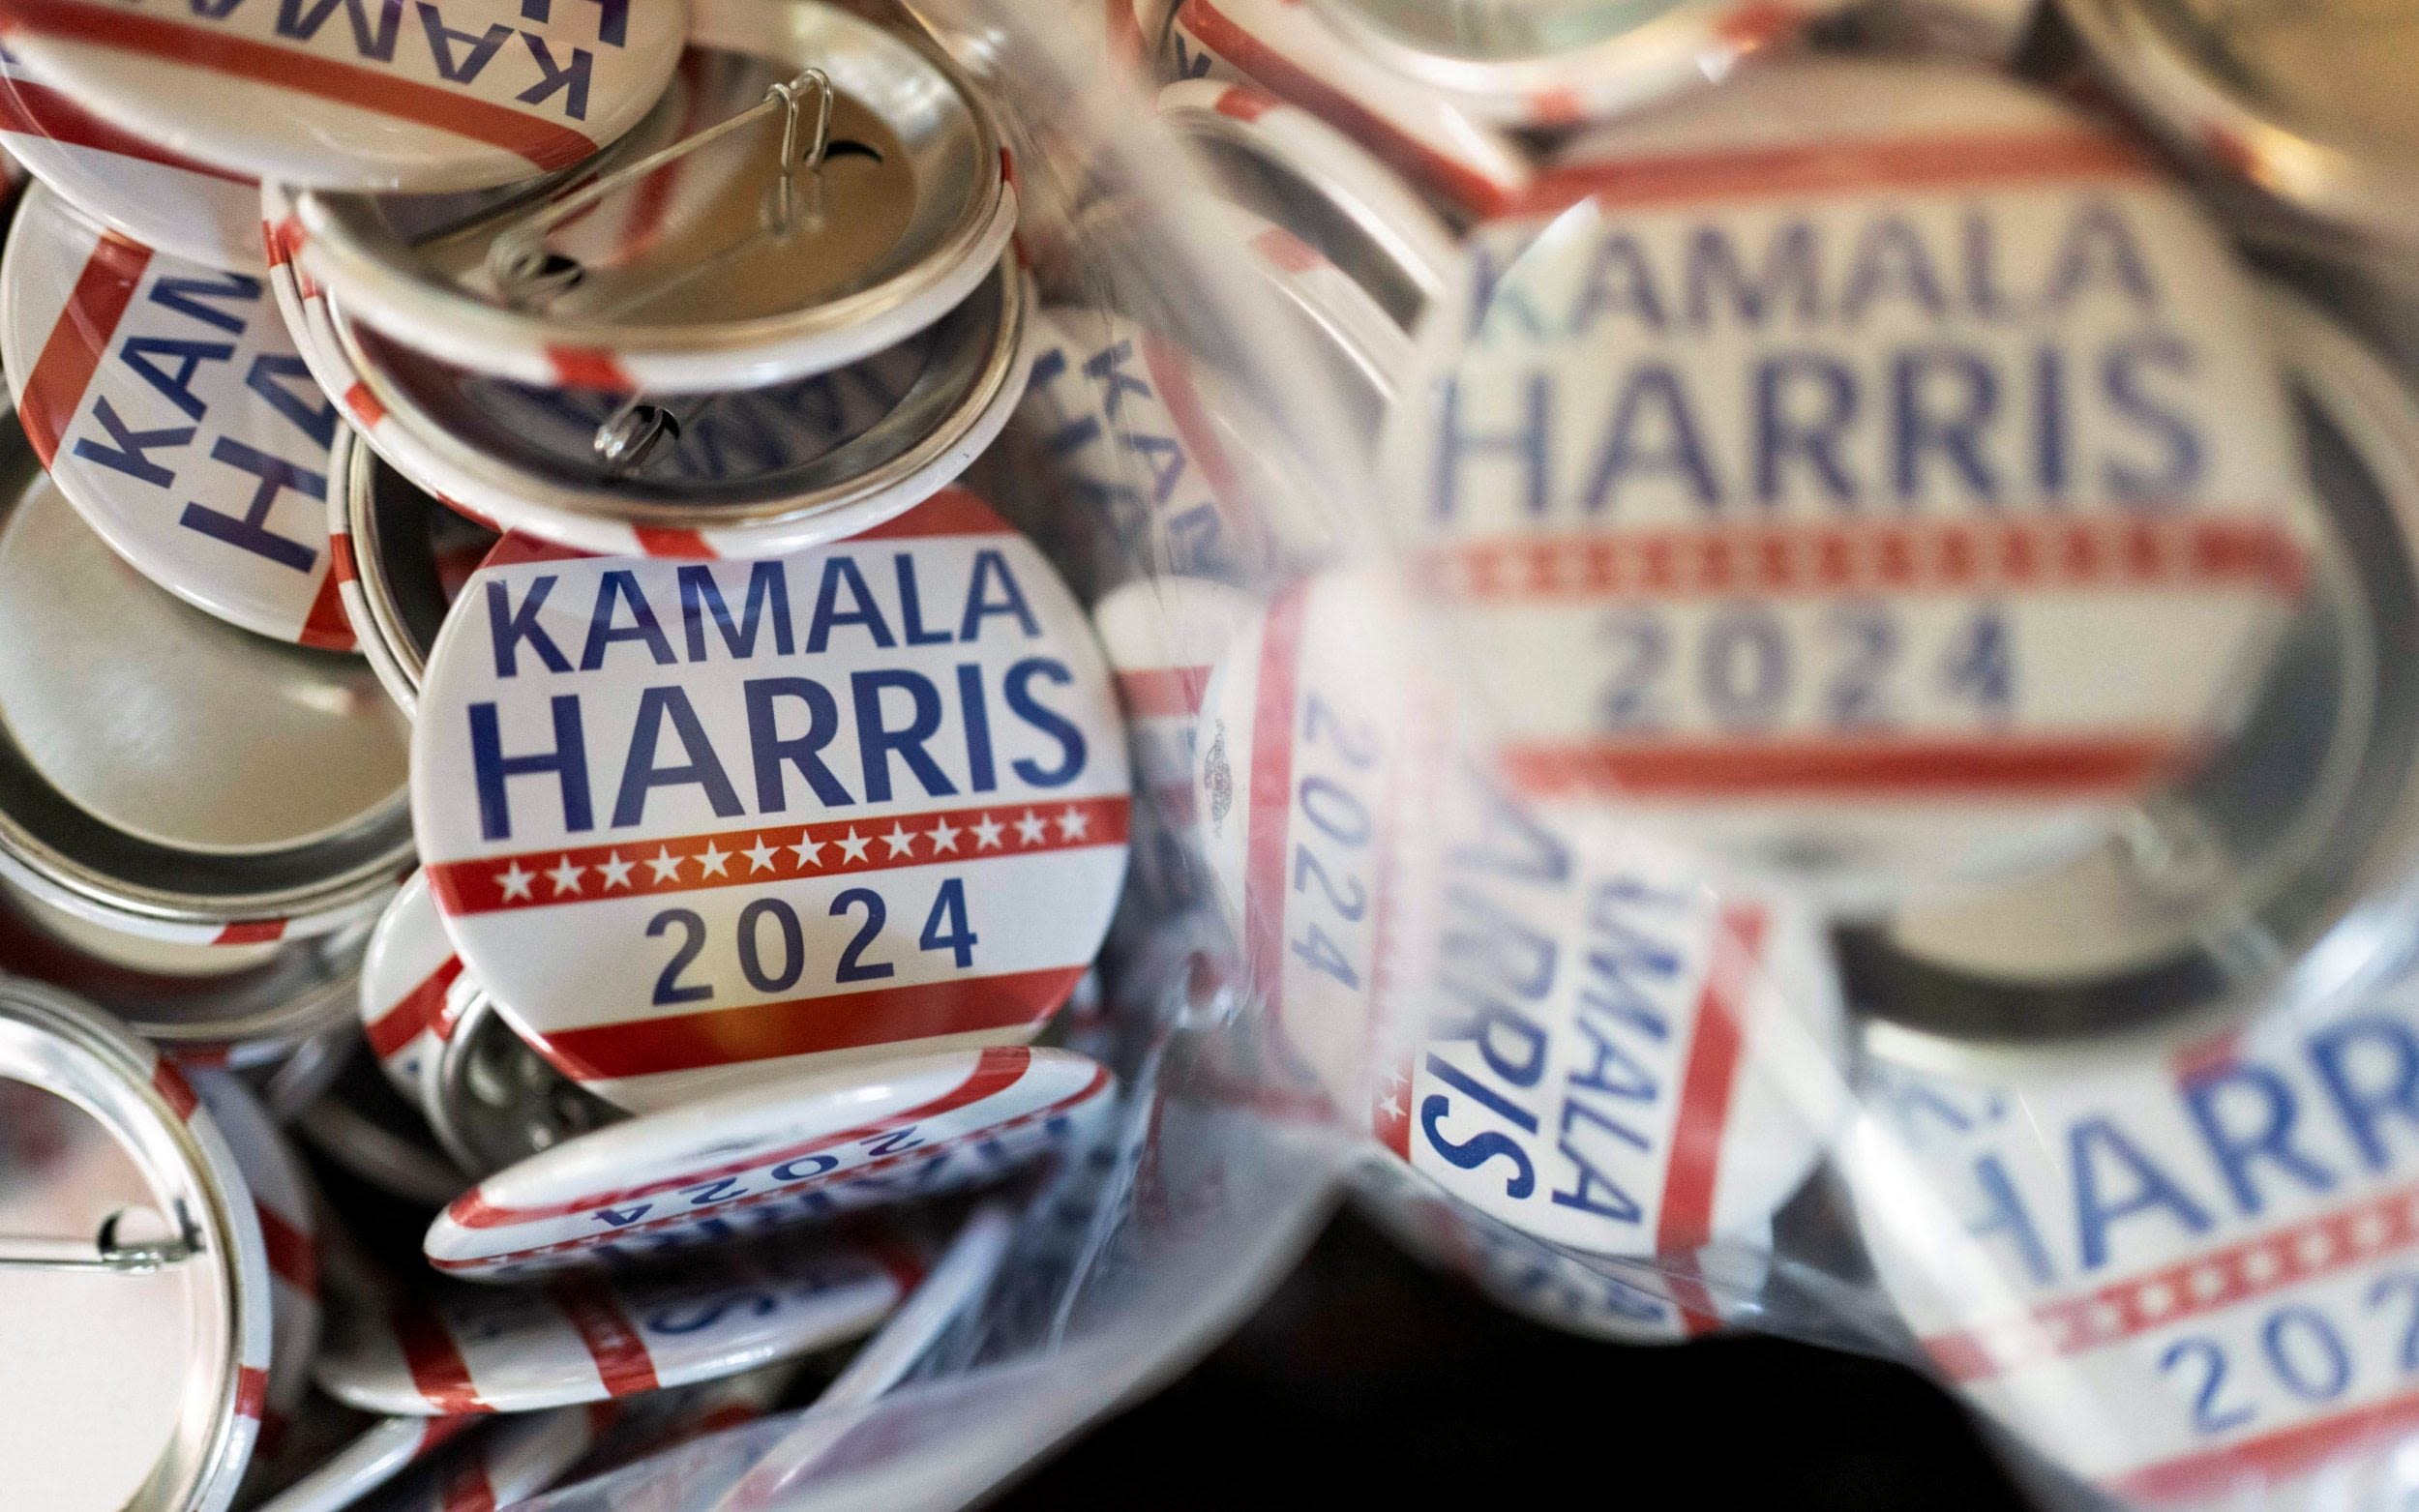 ‘White Dudes for Harris’ hold mass online meeting to support Kamala